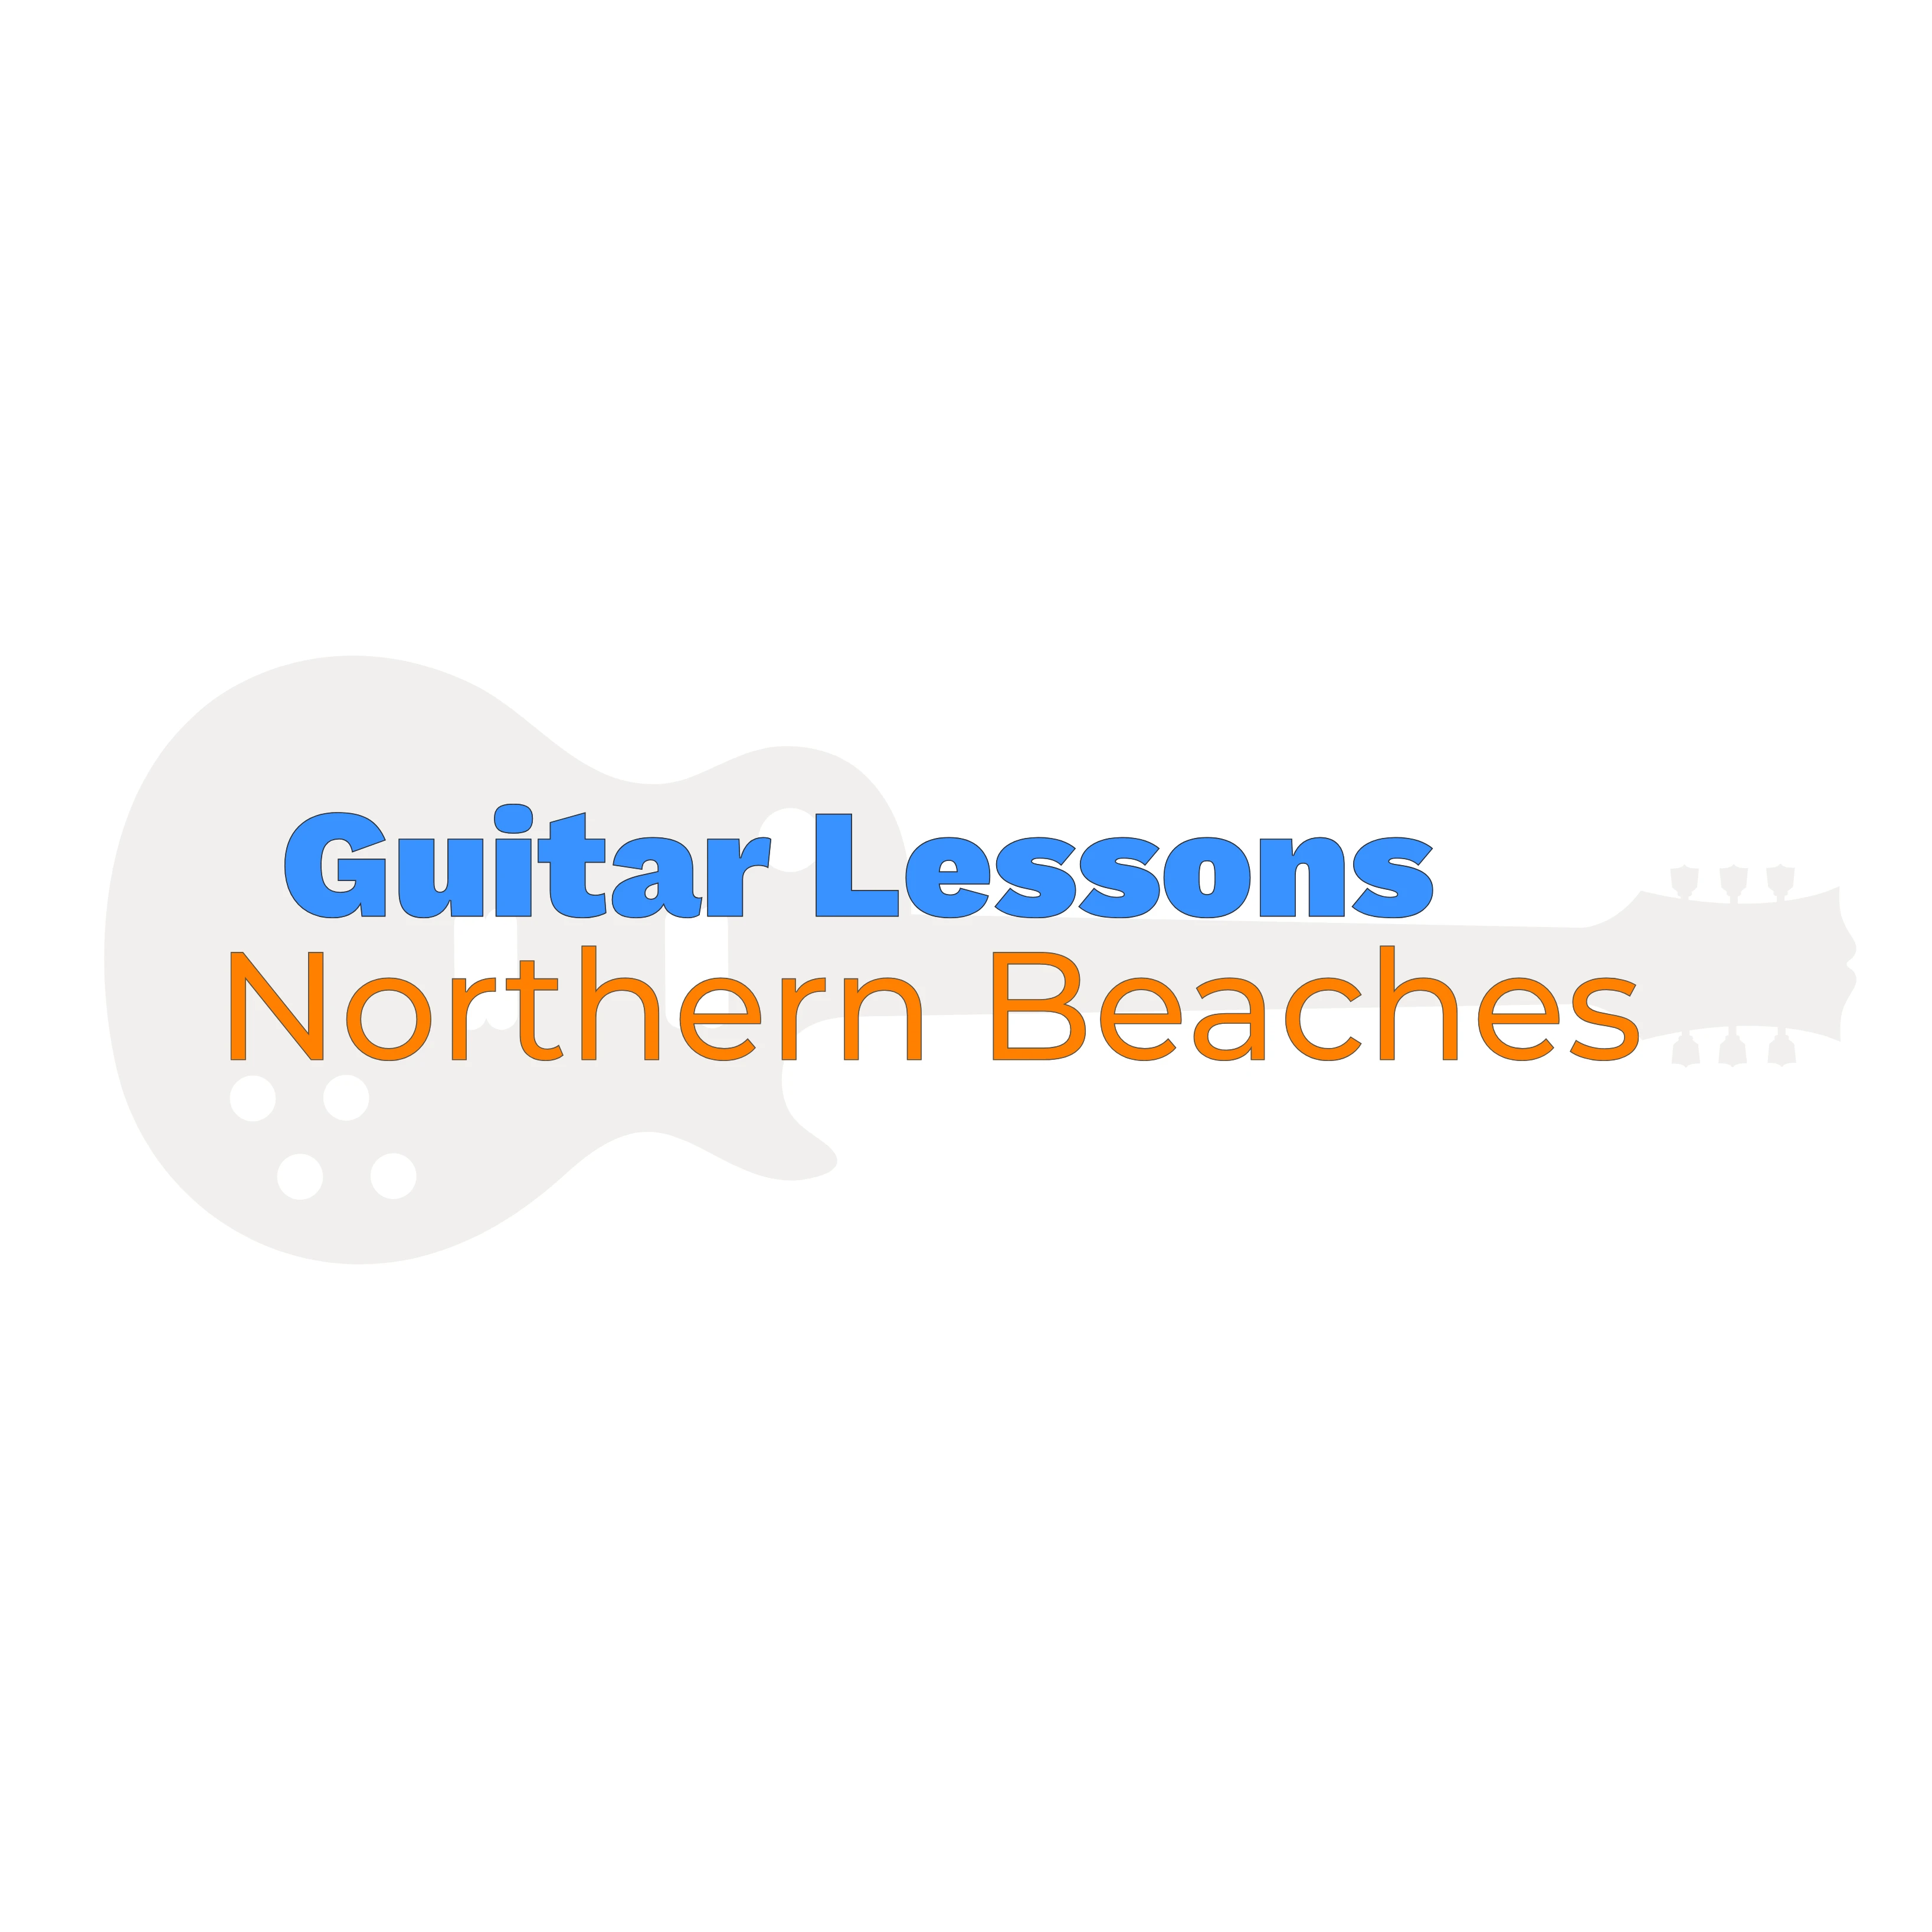 Guitar Lessons Northern Beaches